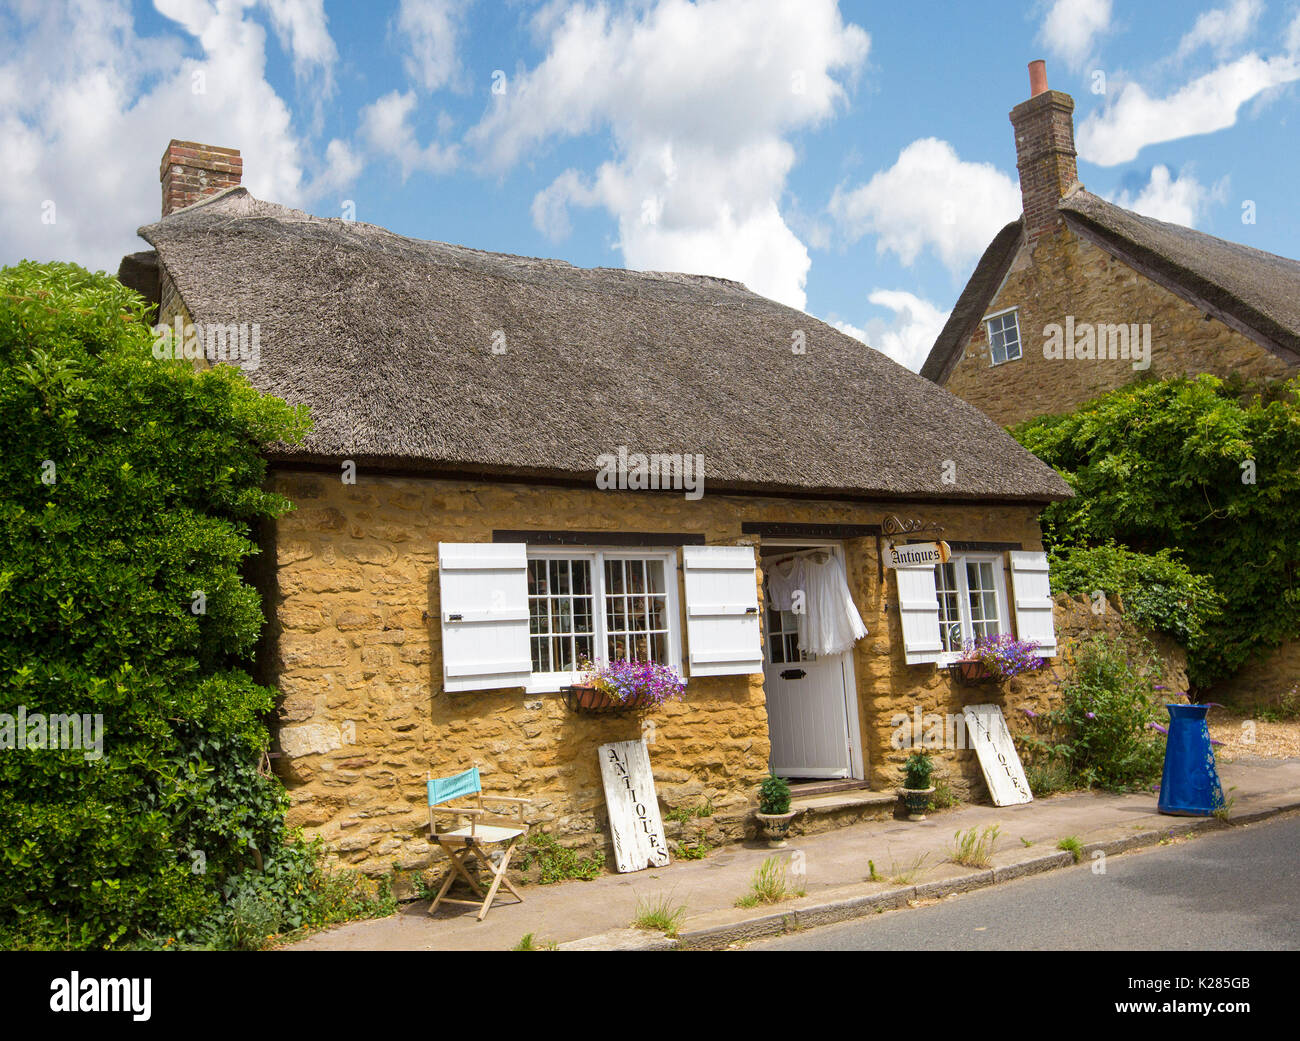 Stone cottage with thatched roof and window shutters, used as antique shop, at historic village of Abbotsbury, Dorset, England under blue sky Stock Photo